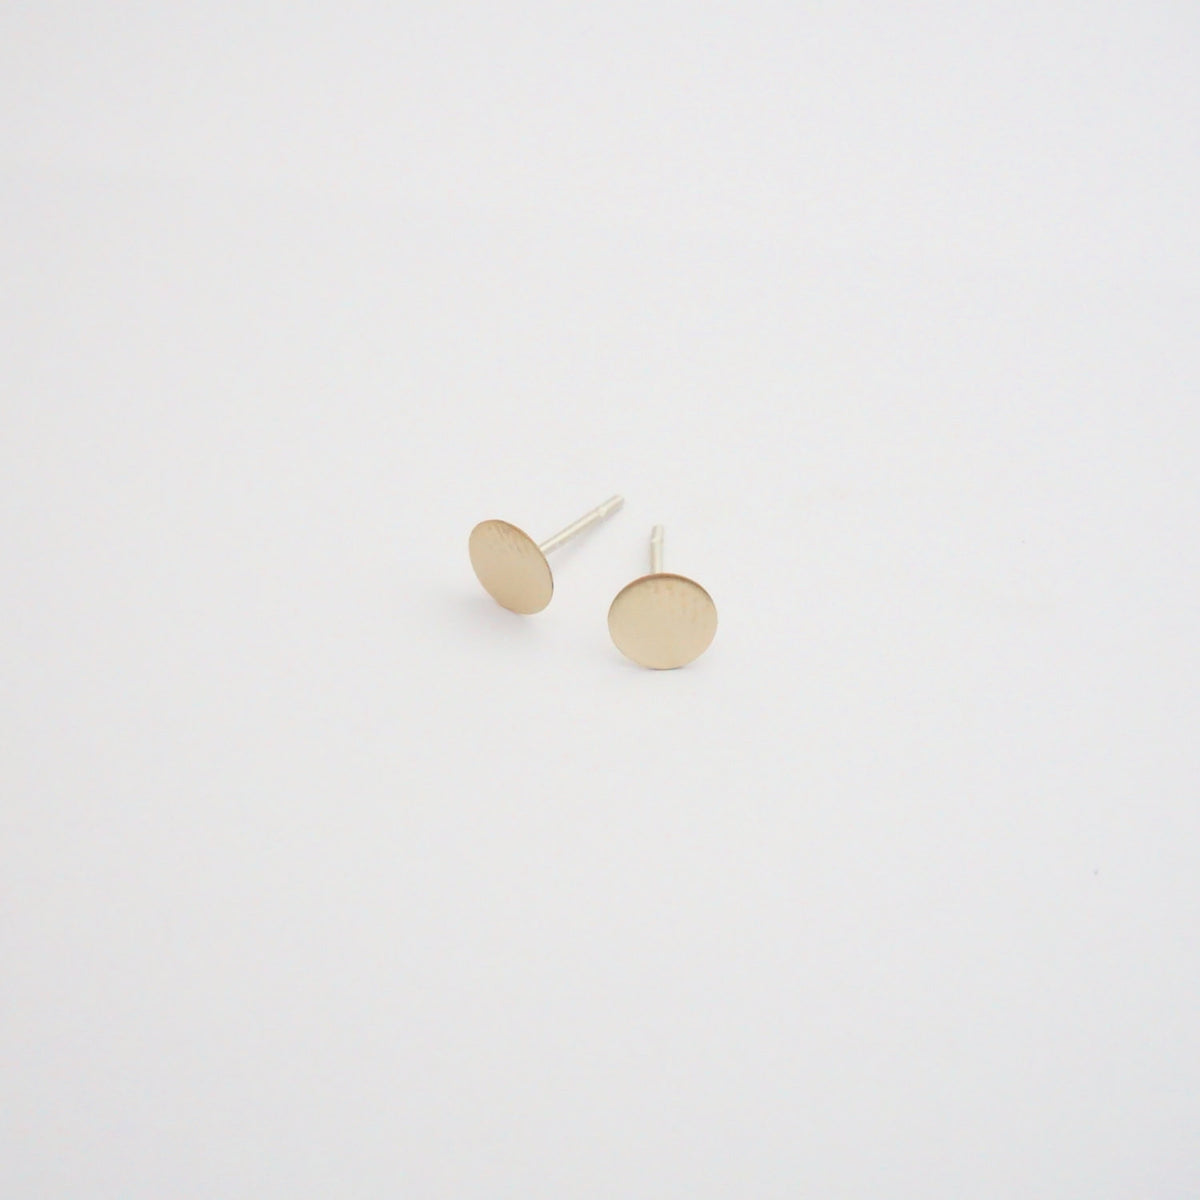 Contemporary Styled, Hand-Made Flat Circular Gold Colored Brass Studs - 0121 - Virginia Wynne Designs